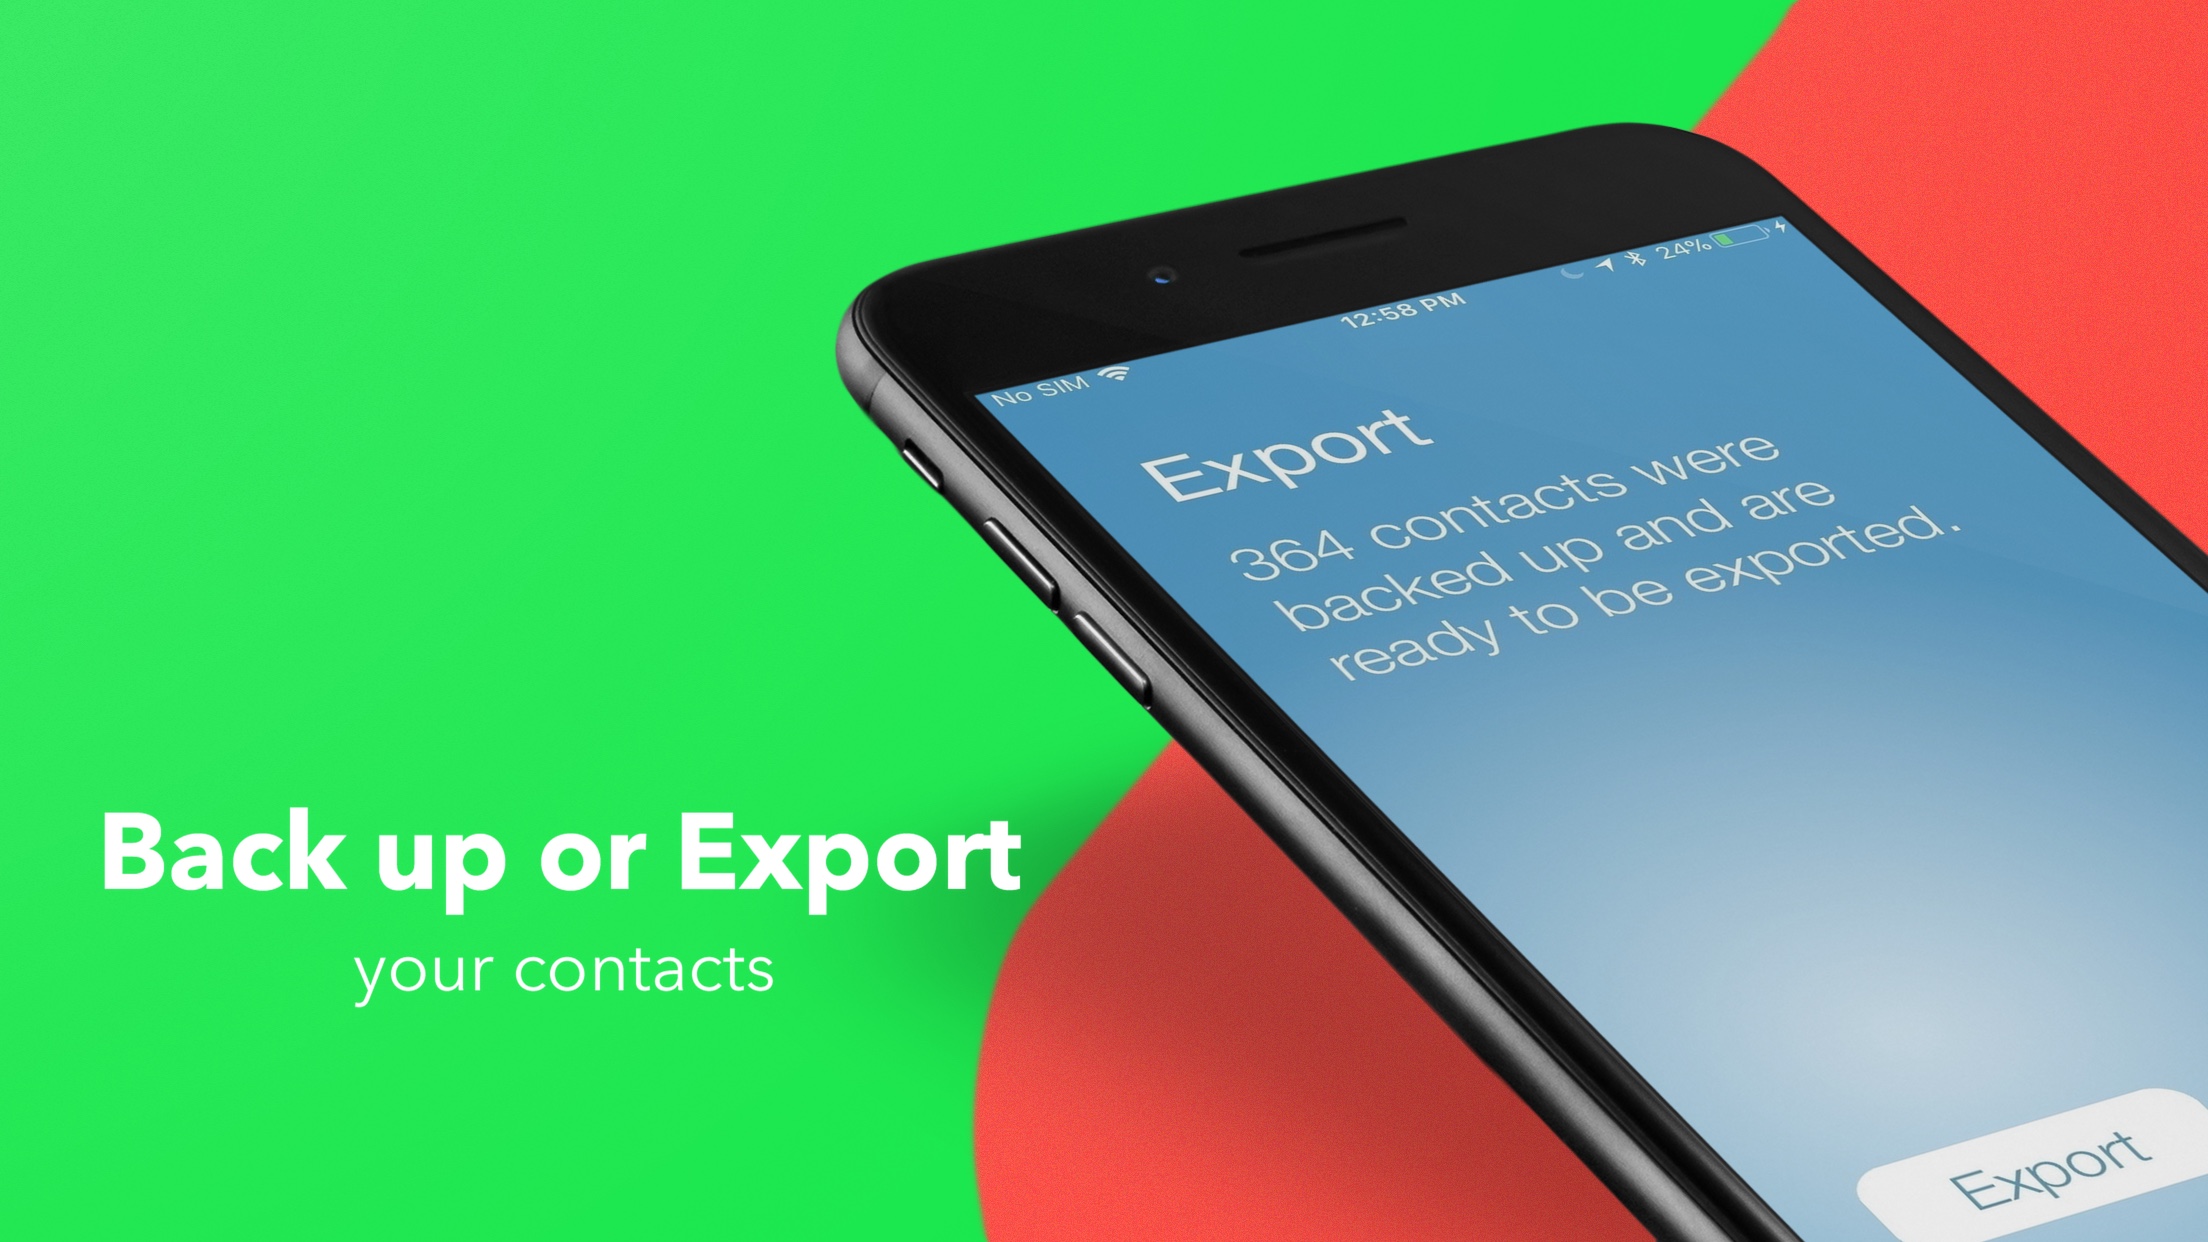 How to backup or export iPhone contacts